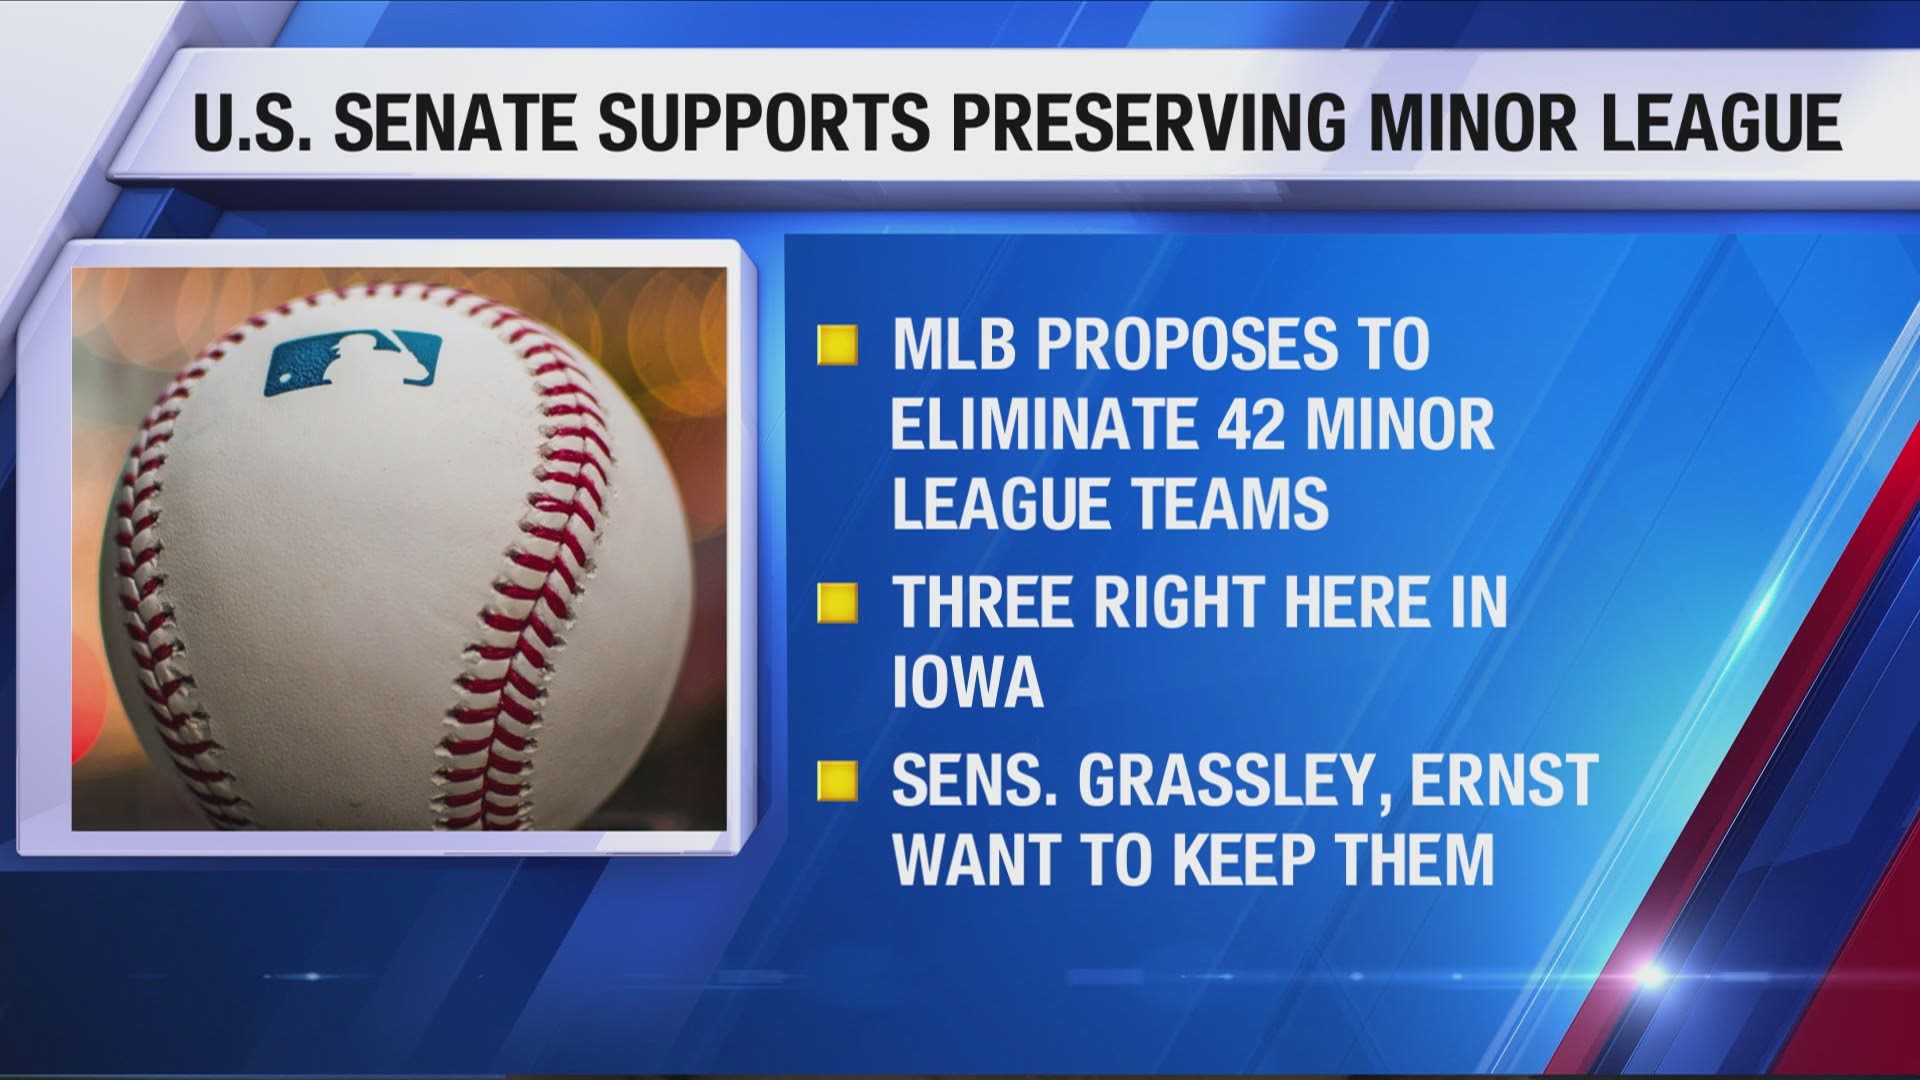 The Quad City River Bandits, Burlington Bees and Clinton Lumber Kings may be in danger, as the MLB proposed to eliminate 42 minor league teams across the country.